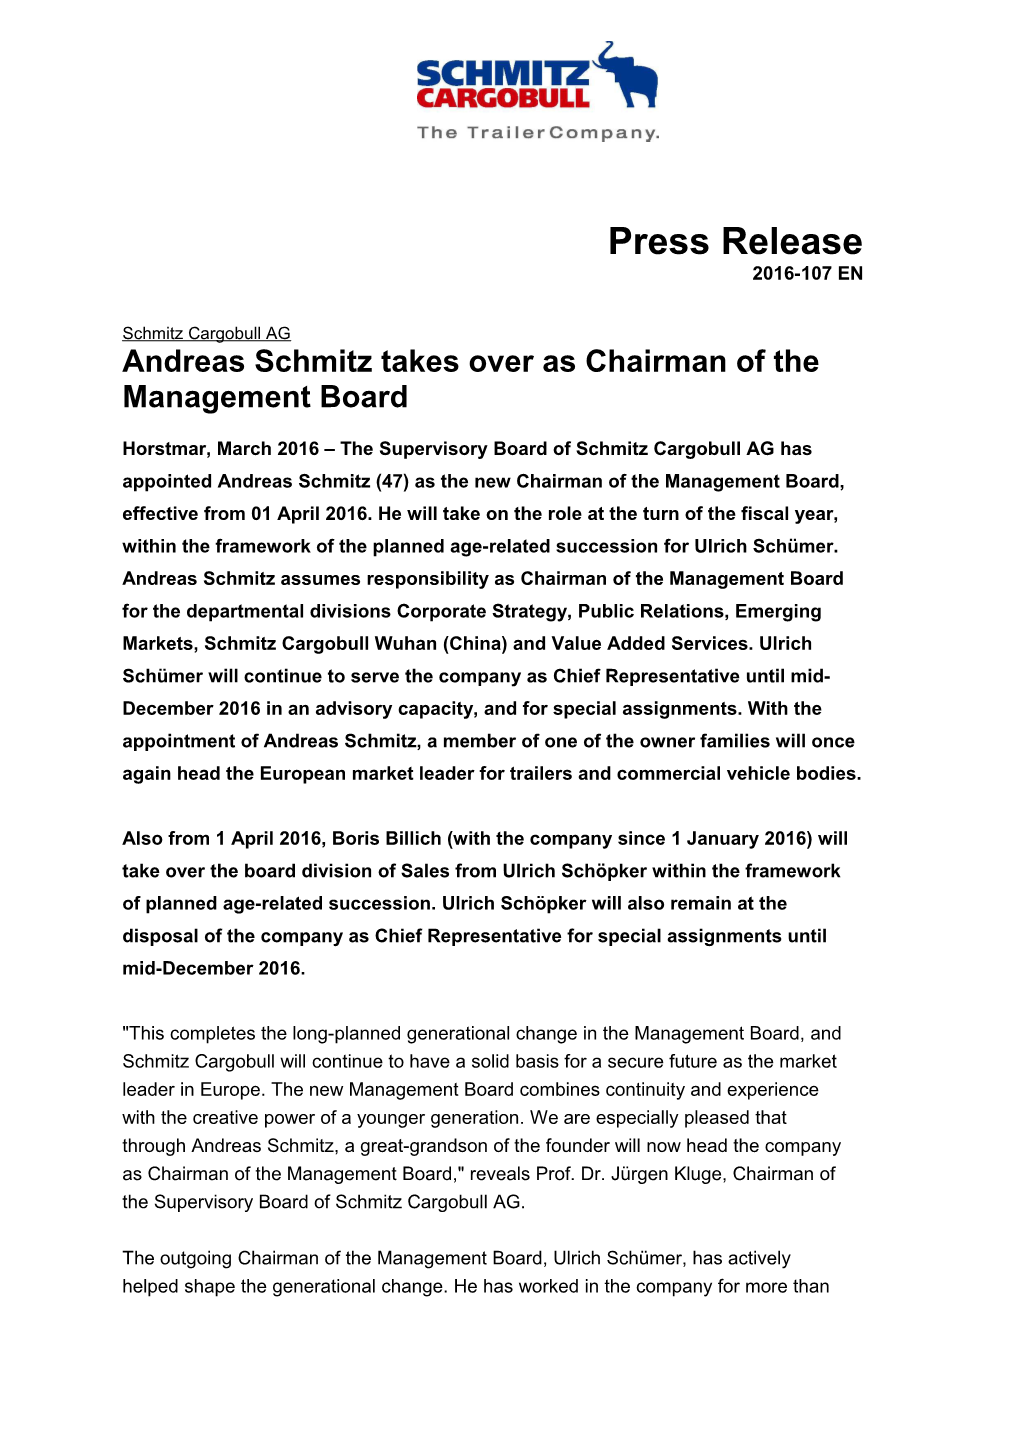 Andreas Schmitz Takes Over As Chairman of the Management Board